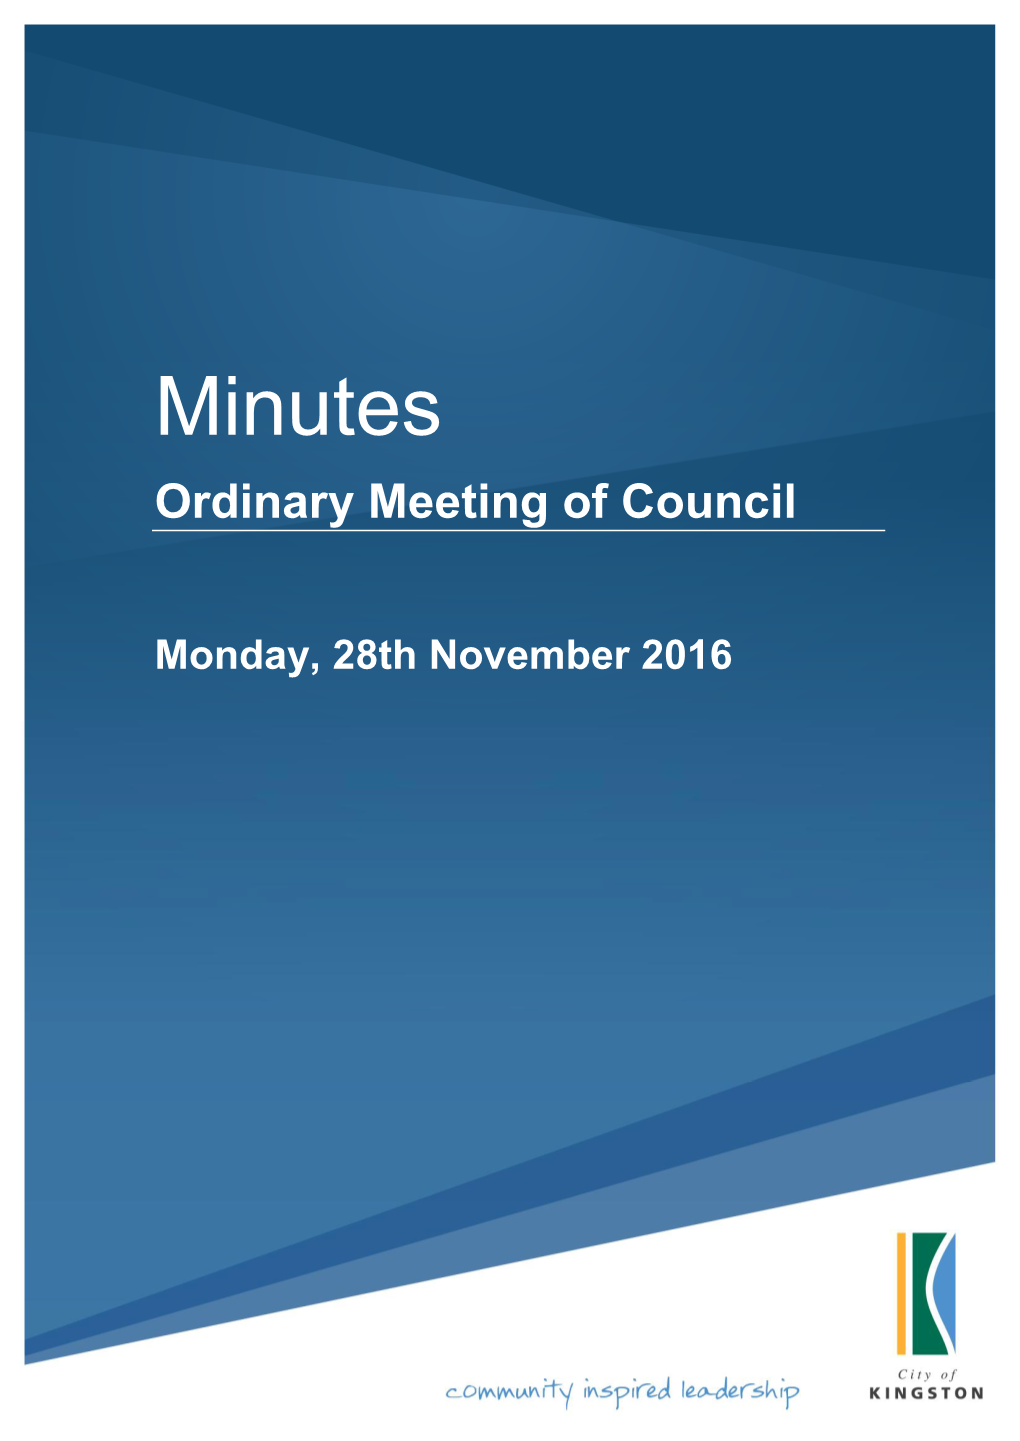 Minutes Ordinary Meeting of Council